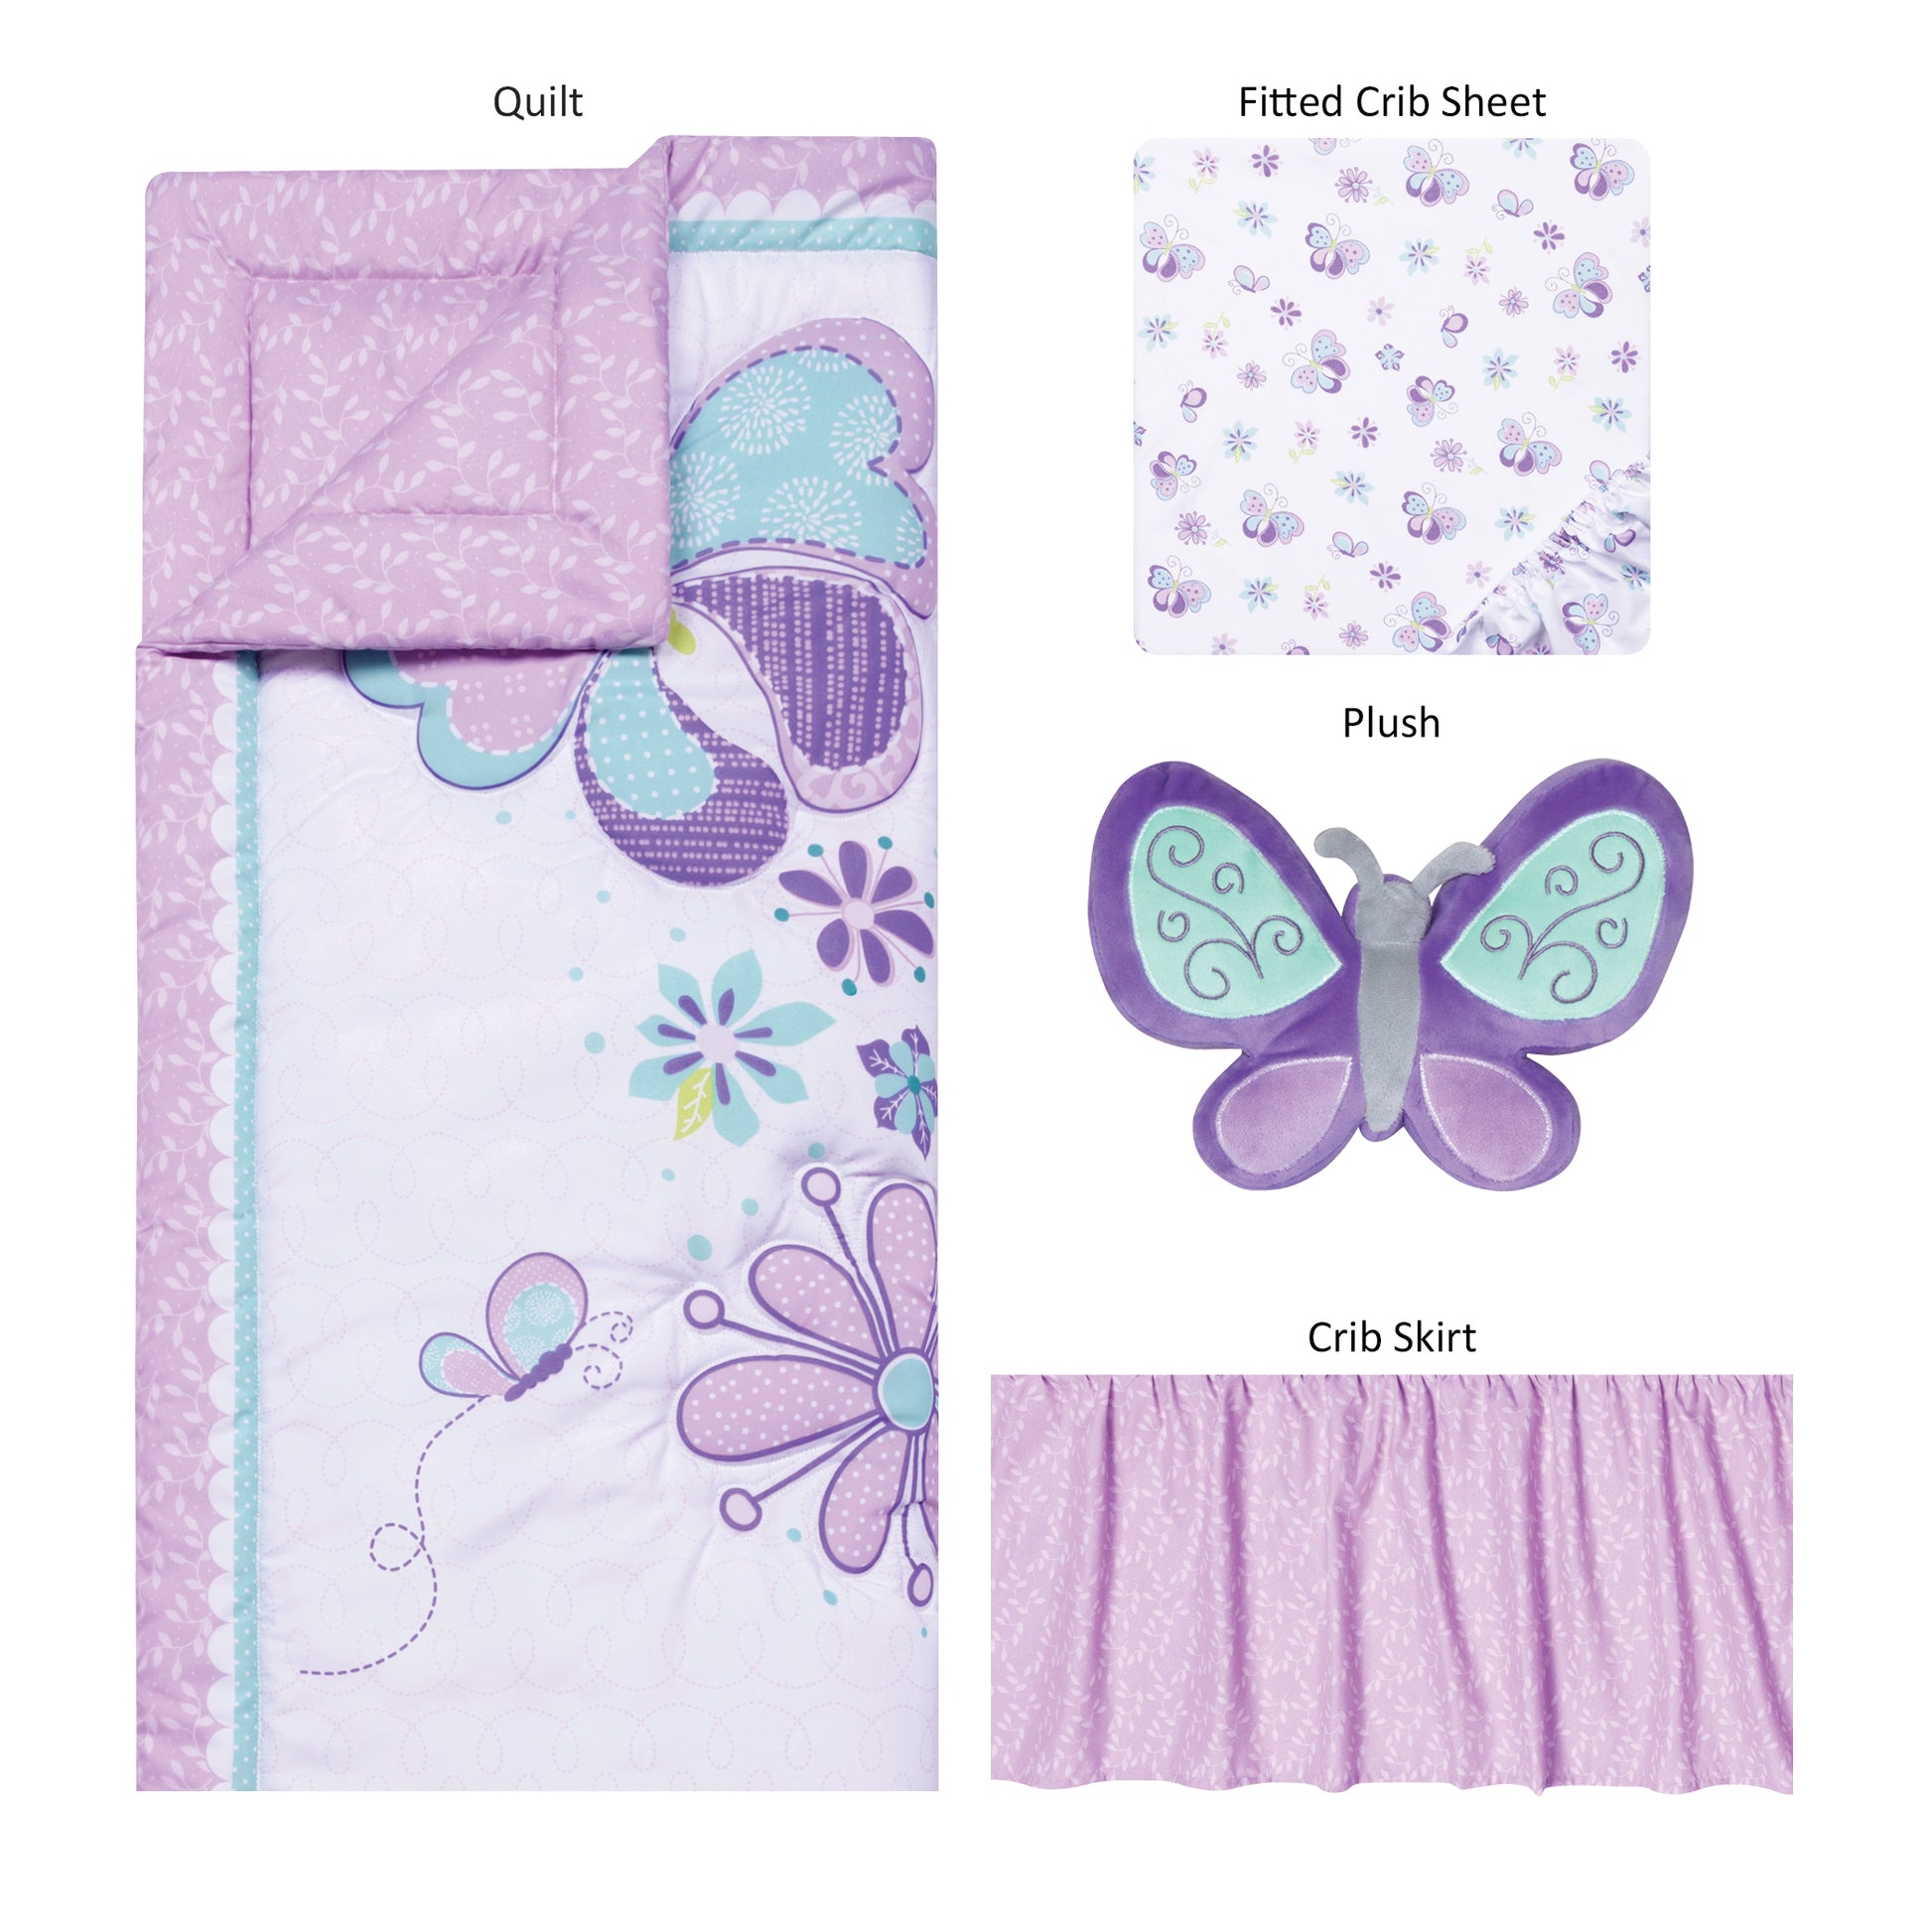  Sammy and Lou Butterfly Meadow 4 Piece Crib Bedding; pieces laid out includes crib quilt, crib sheet, crib skirt and plush toy